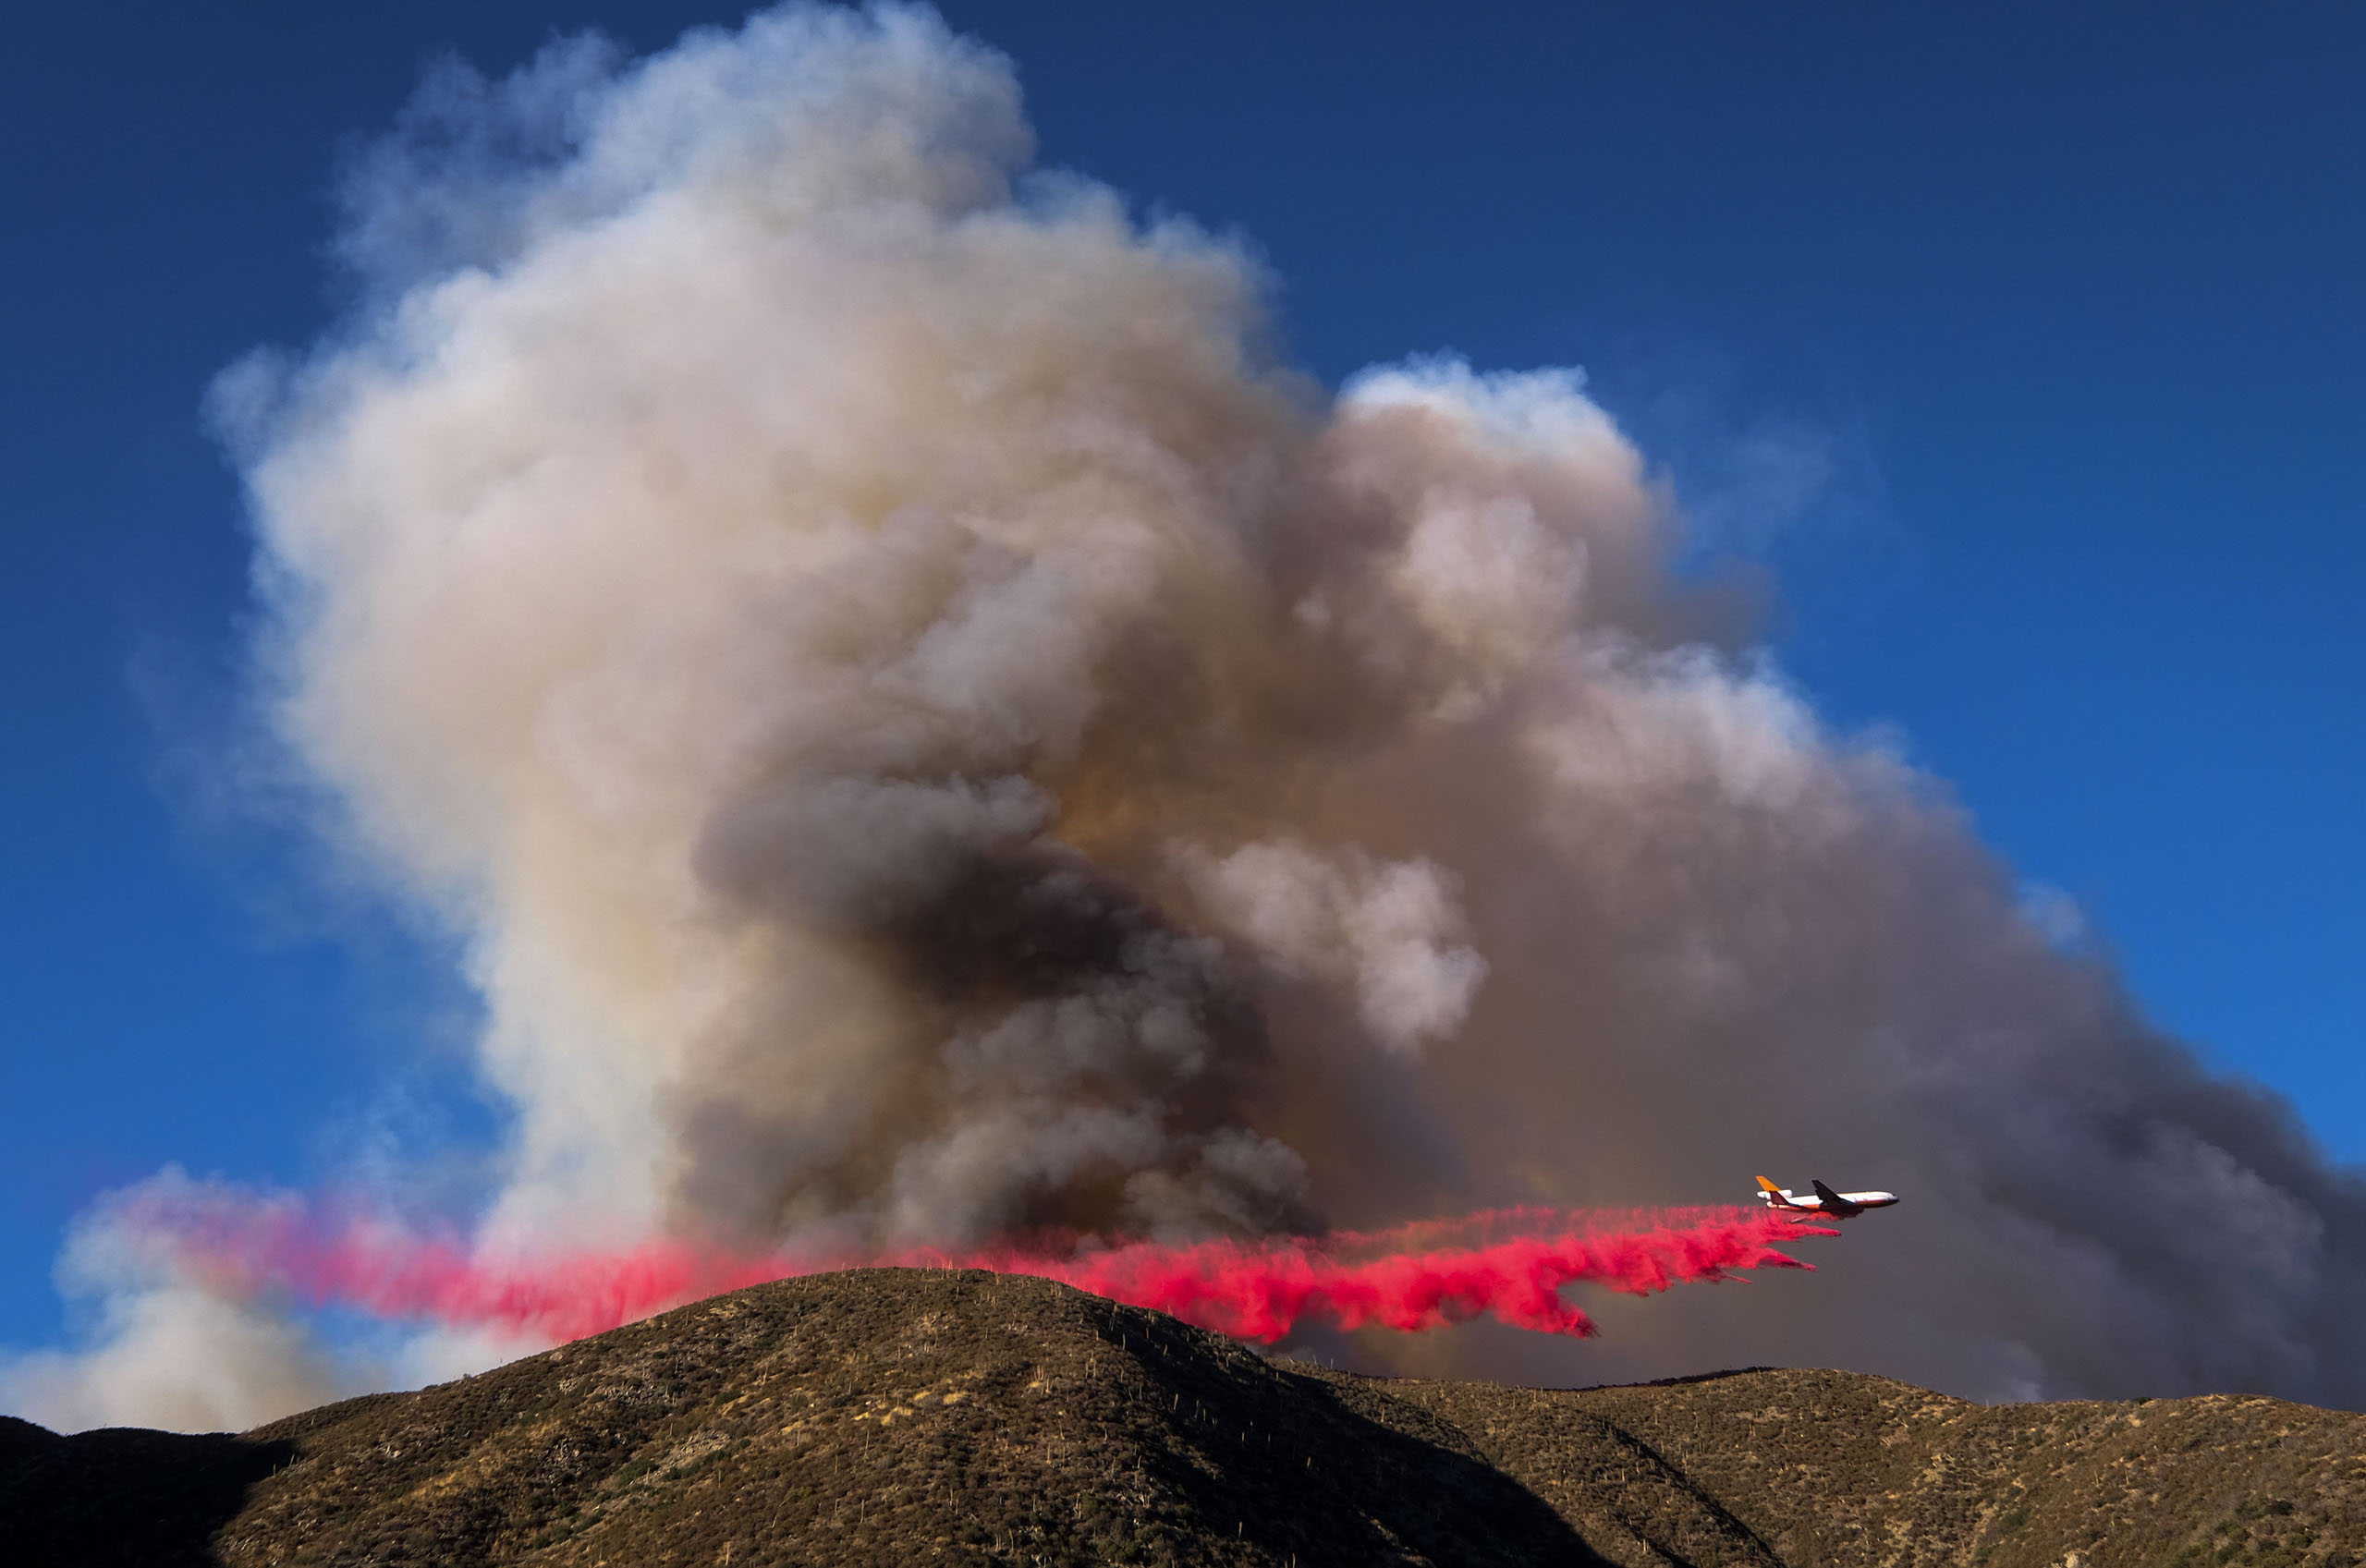 An air tanker drops fire retardant on the Blue Cut wildfire in Lytle Creek, Calif., Aug. 16, 2016.